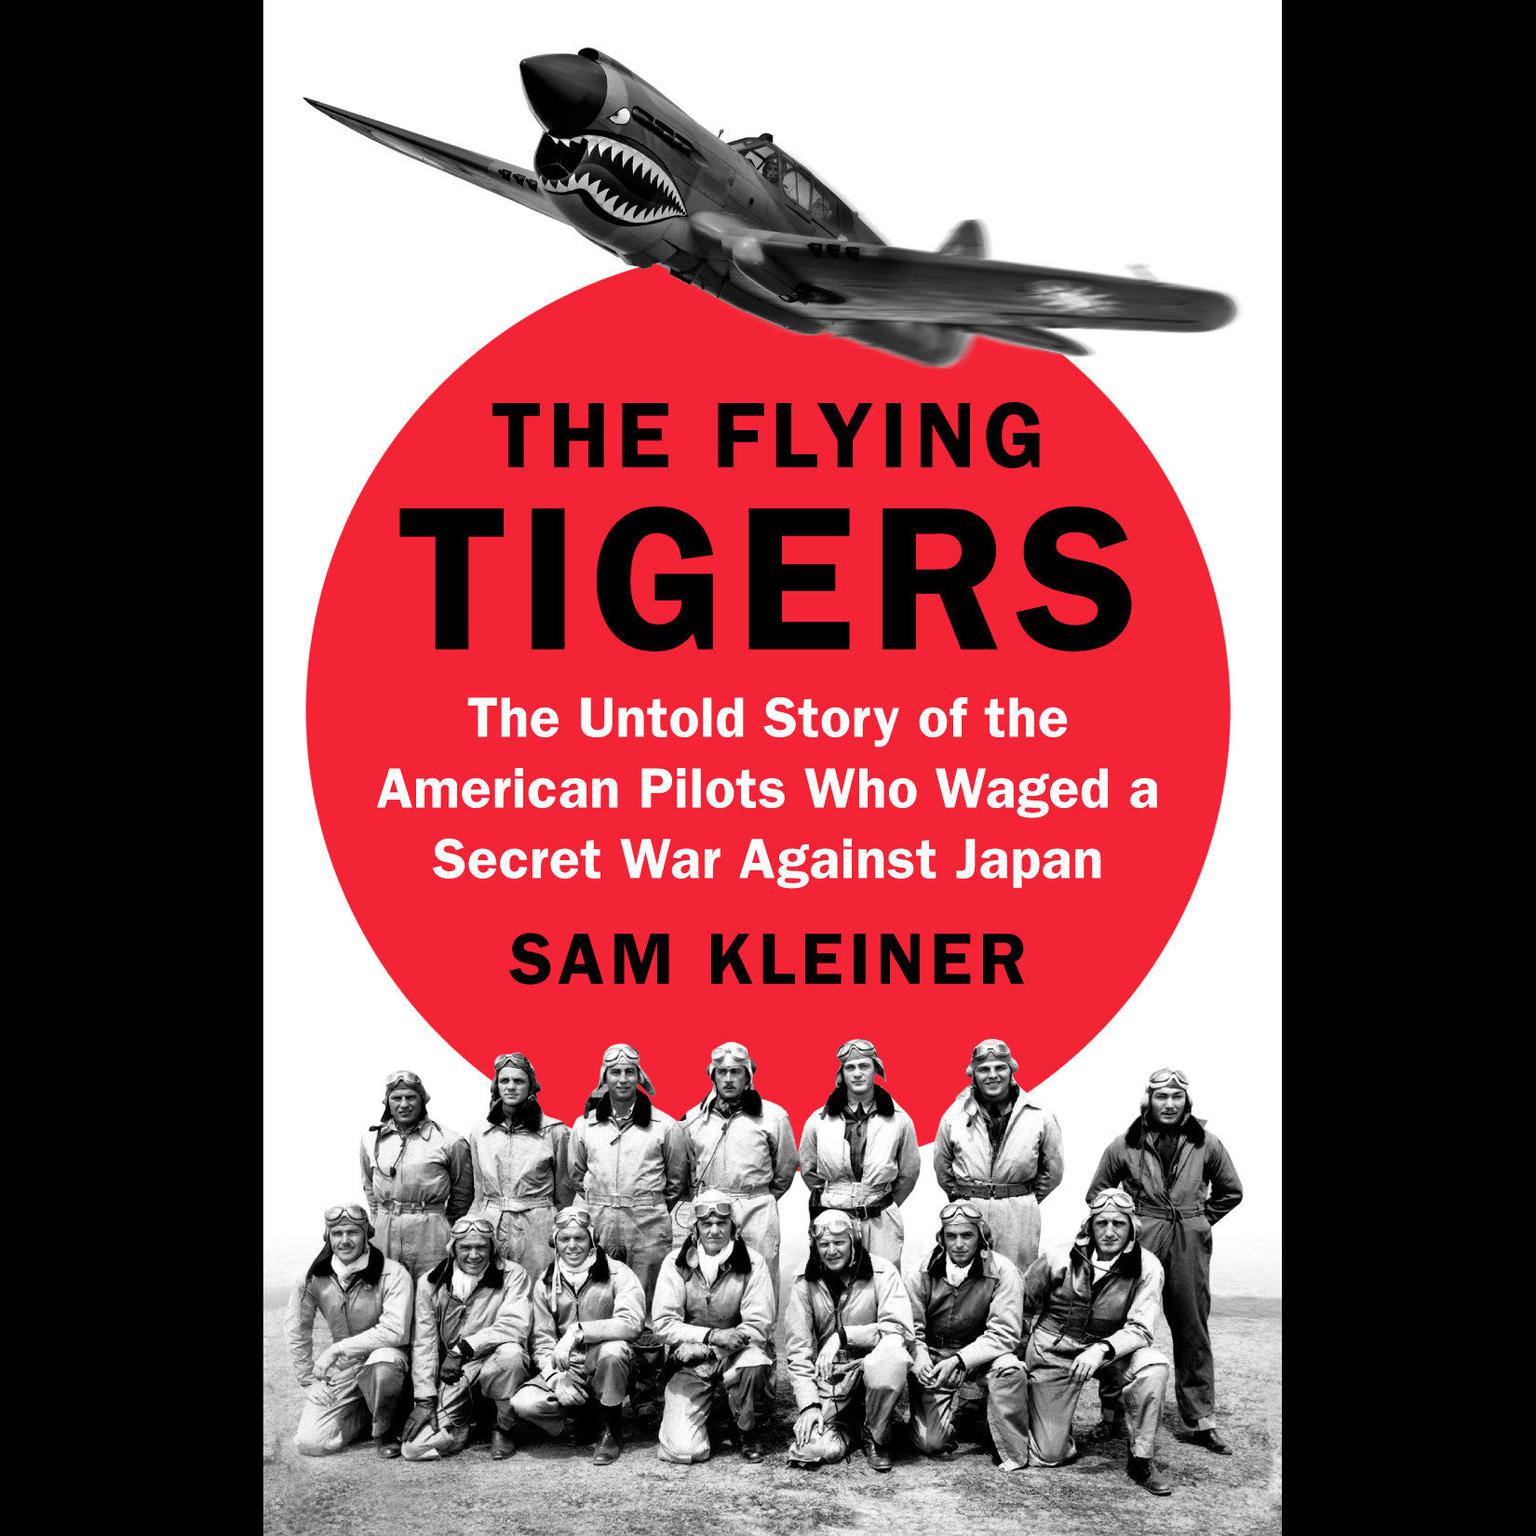 The Flying Tigers: The Untold Story of the American Pilots Who Waged a Secret War Against Japan Audiobook, by Samuel Kleiner